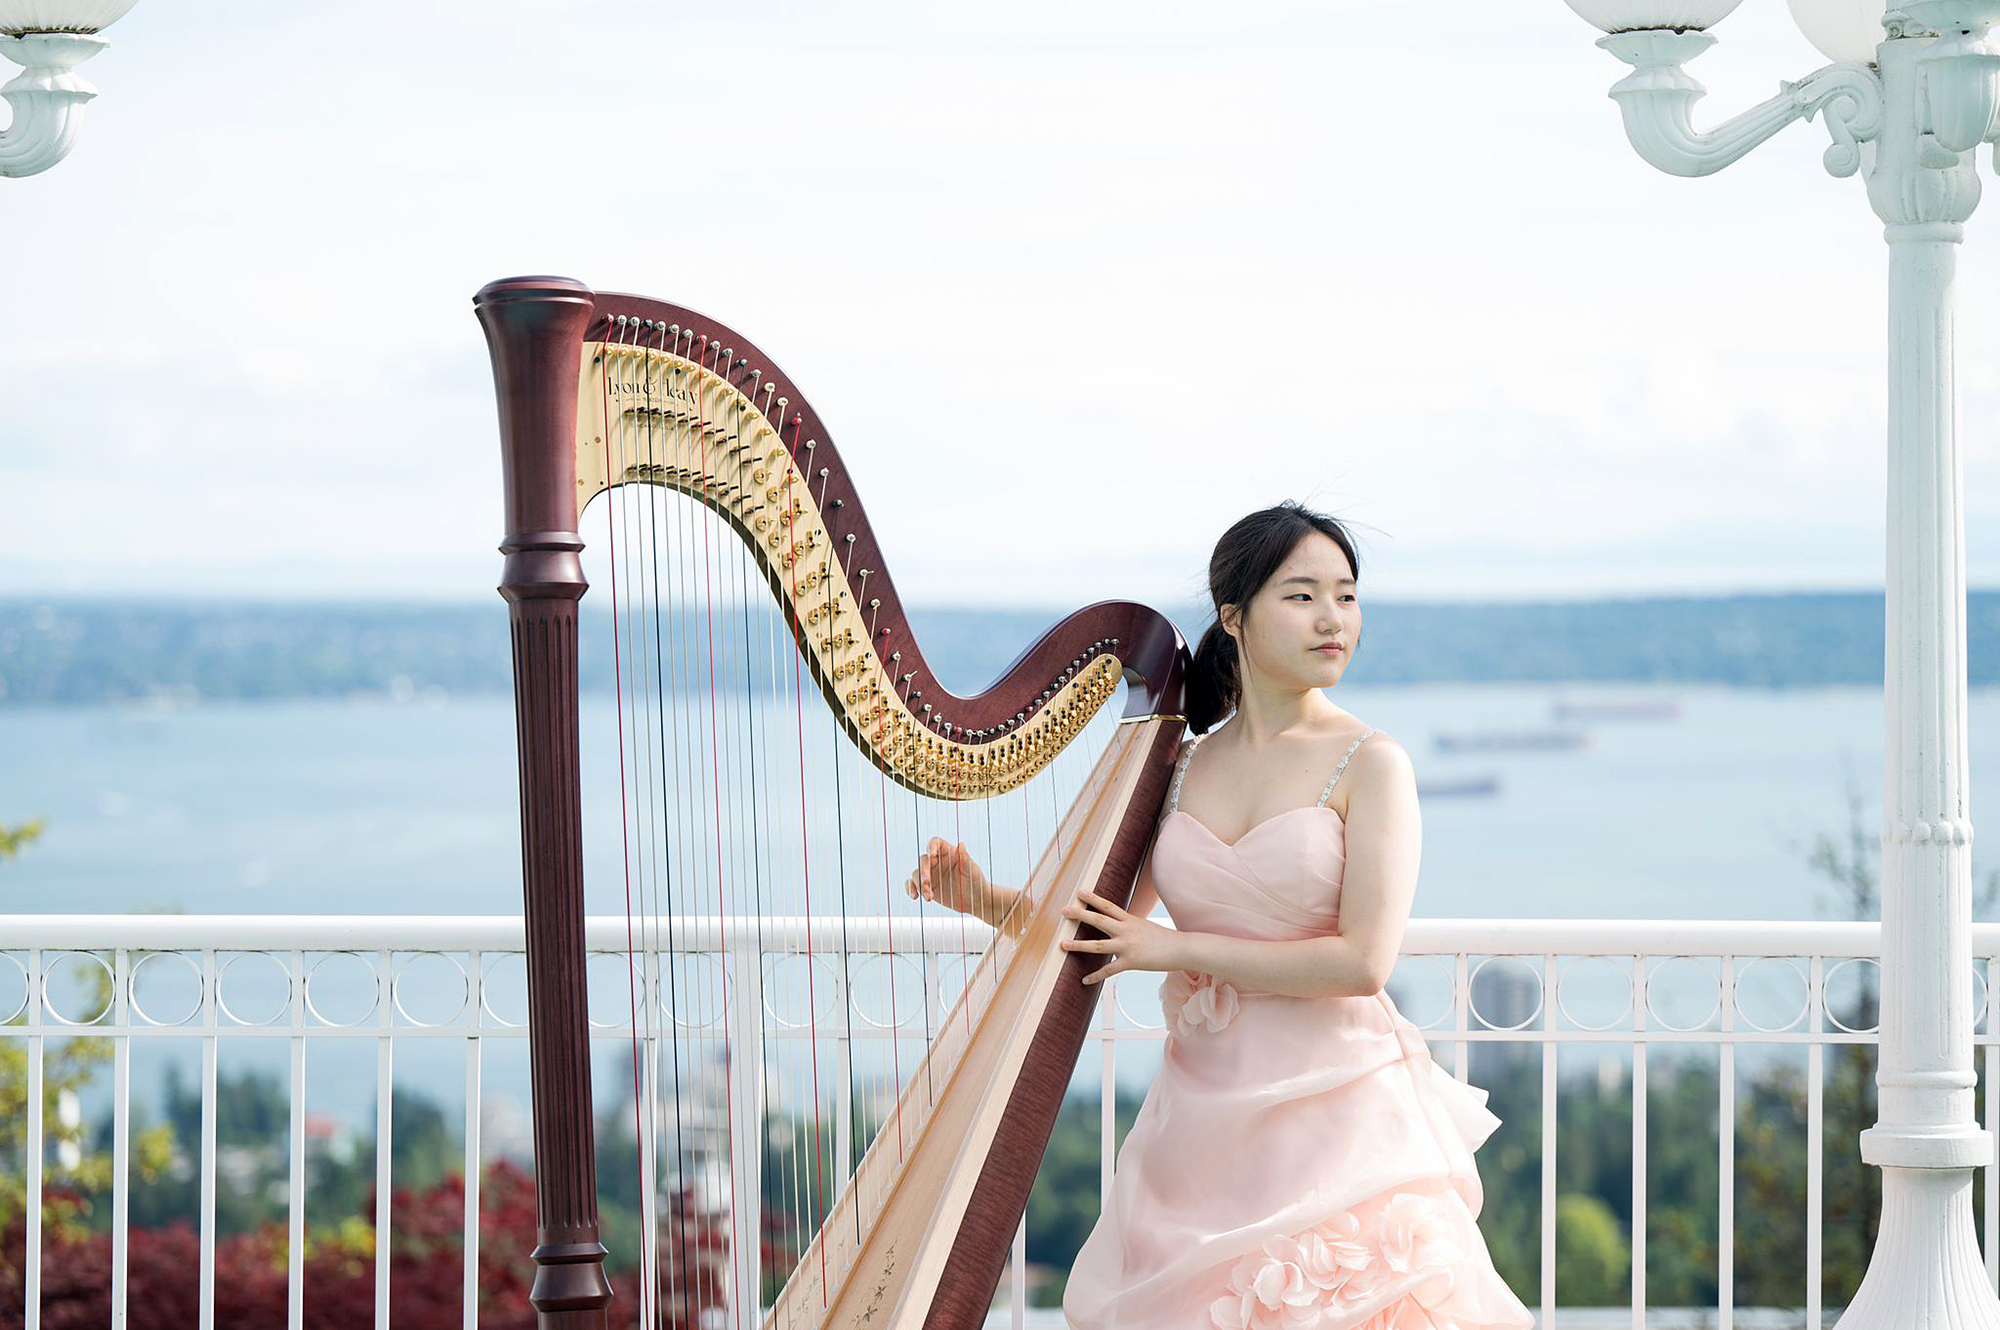 Coquitlam harpist one of the youngest to medal at this world event -  Tri-City News